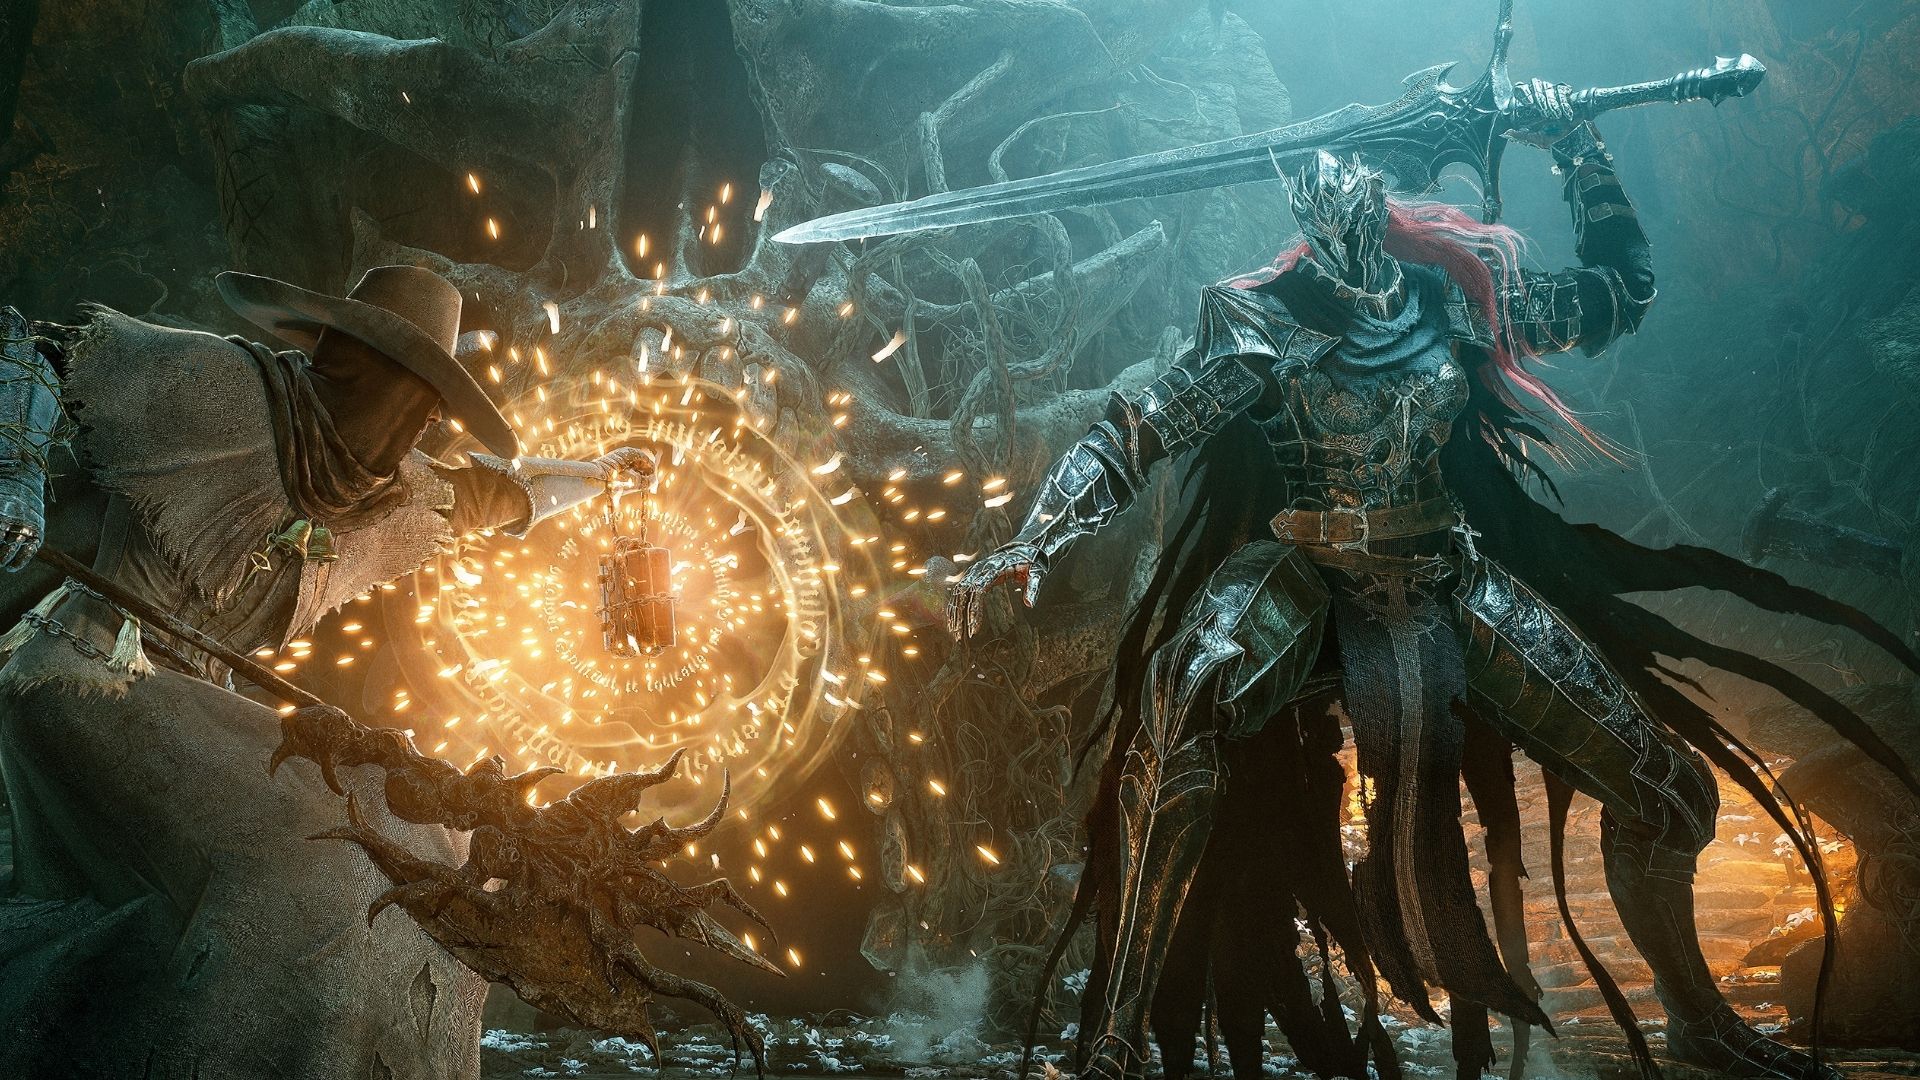 Lords of the Fallen Content Roadmap Includes New Questlines